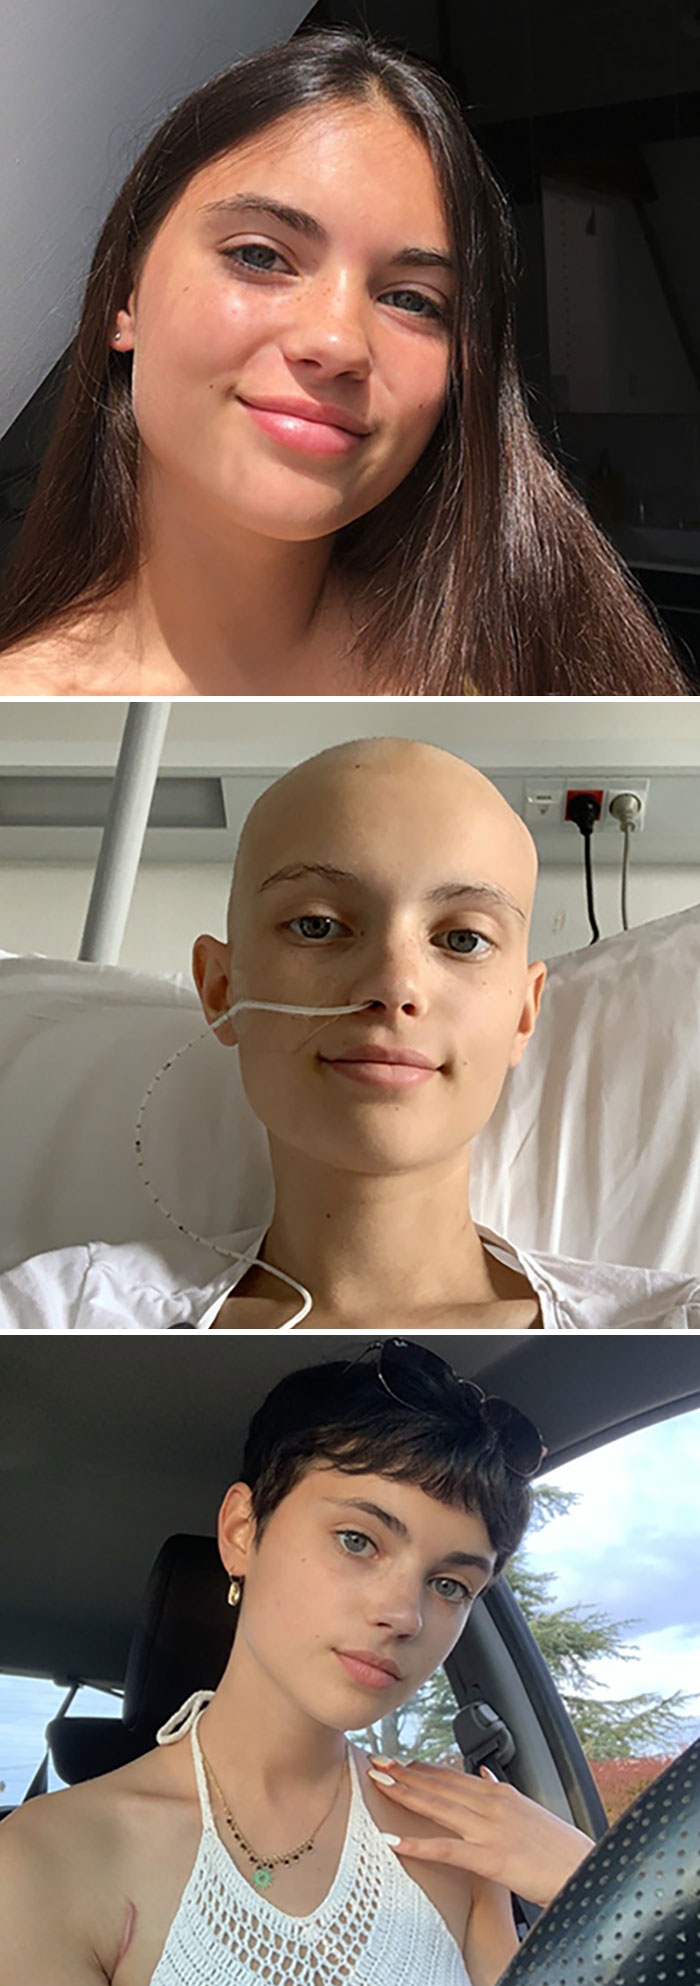 Before And After Beating Cancer. 2019 - 2020 - 2021